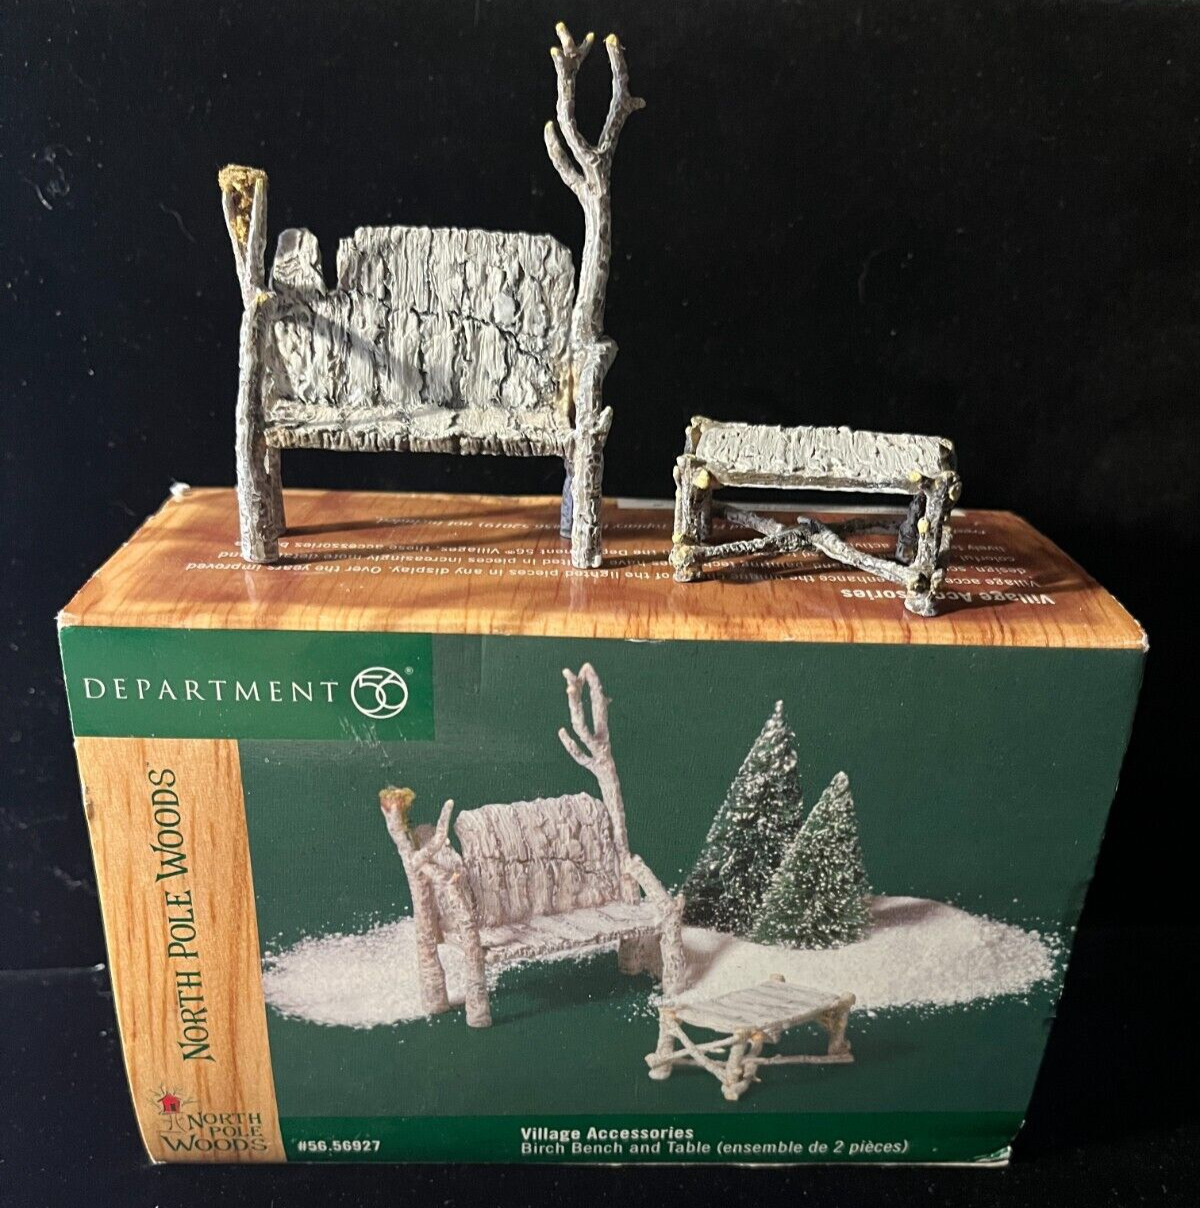 2000 Dept 56 North Pole Woods Village Access. Birch Bench and Table Set 56.56927